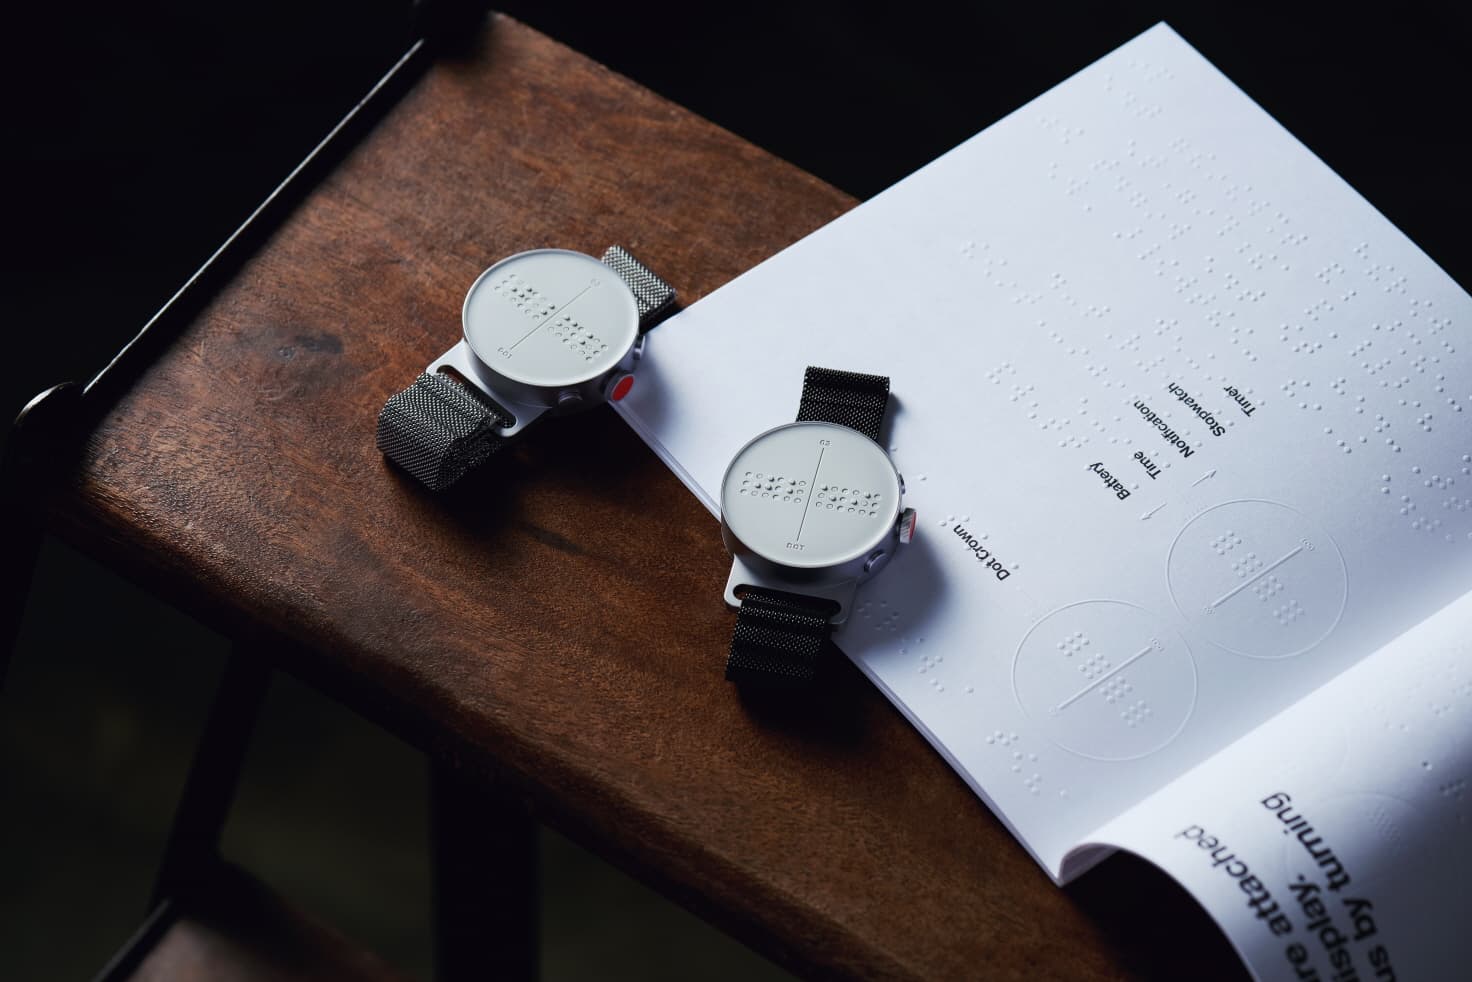 Introducing: The Dot Braille Smartwatch For The Visually Impaired